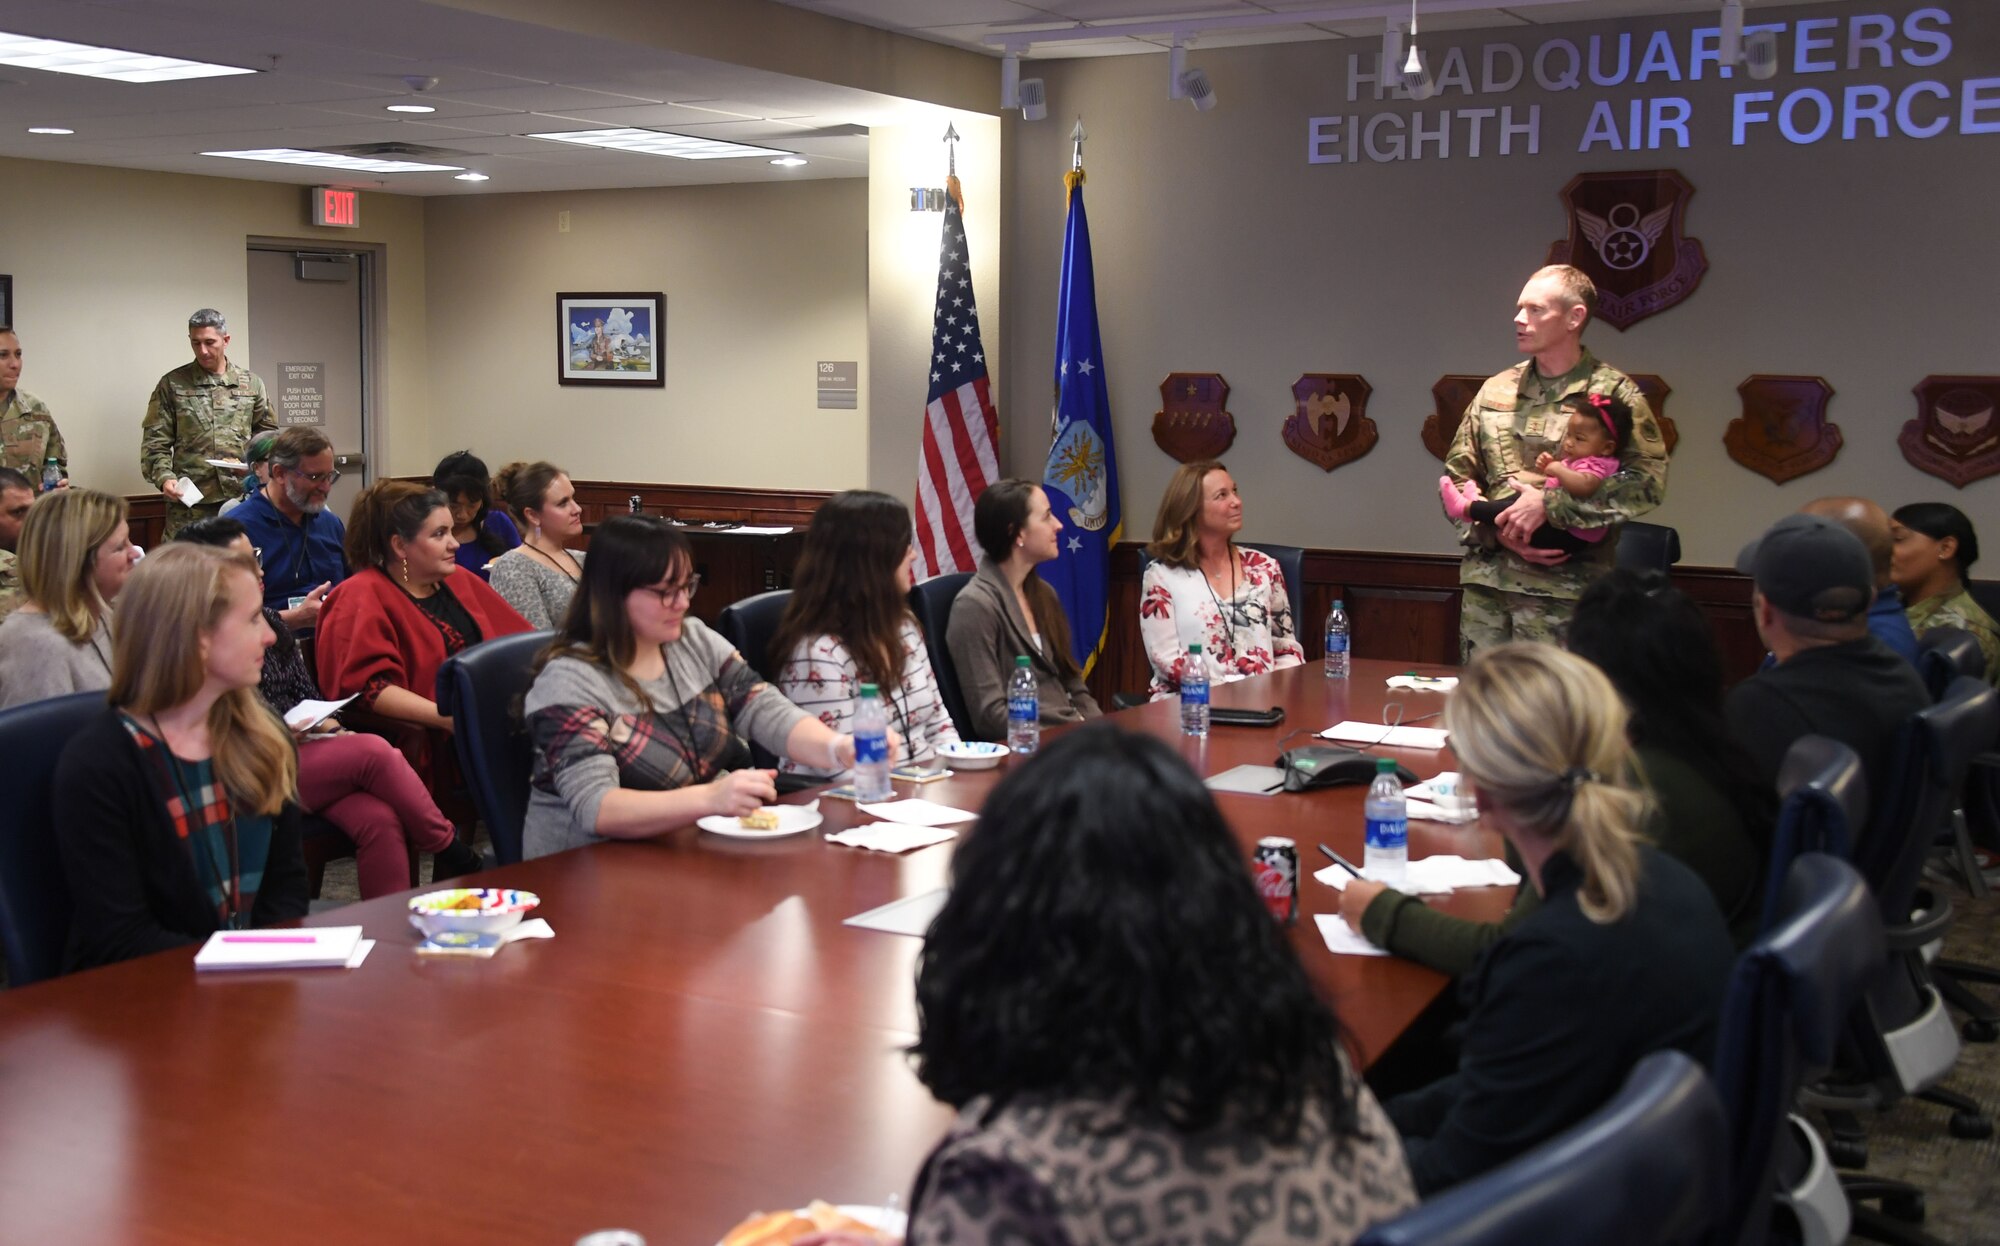 U.S. Air Force Maj. Gen. James Dawkins, Jr., 8th Air Force and Joint-Global Strike Operations Center commander, welcomes more than 30 military spouses to the unit's first Spouses' Orientation at headquarters 8th Air Force, Barksdale AFB, La., Nov. 18, 2019. Spouses received a mission immersion, toured the different J-GSOC centers and gained a firsthand look at the contributions of their military spouses. The event was held to promote communication and shared knowledge within the Airmen’s home lives.